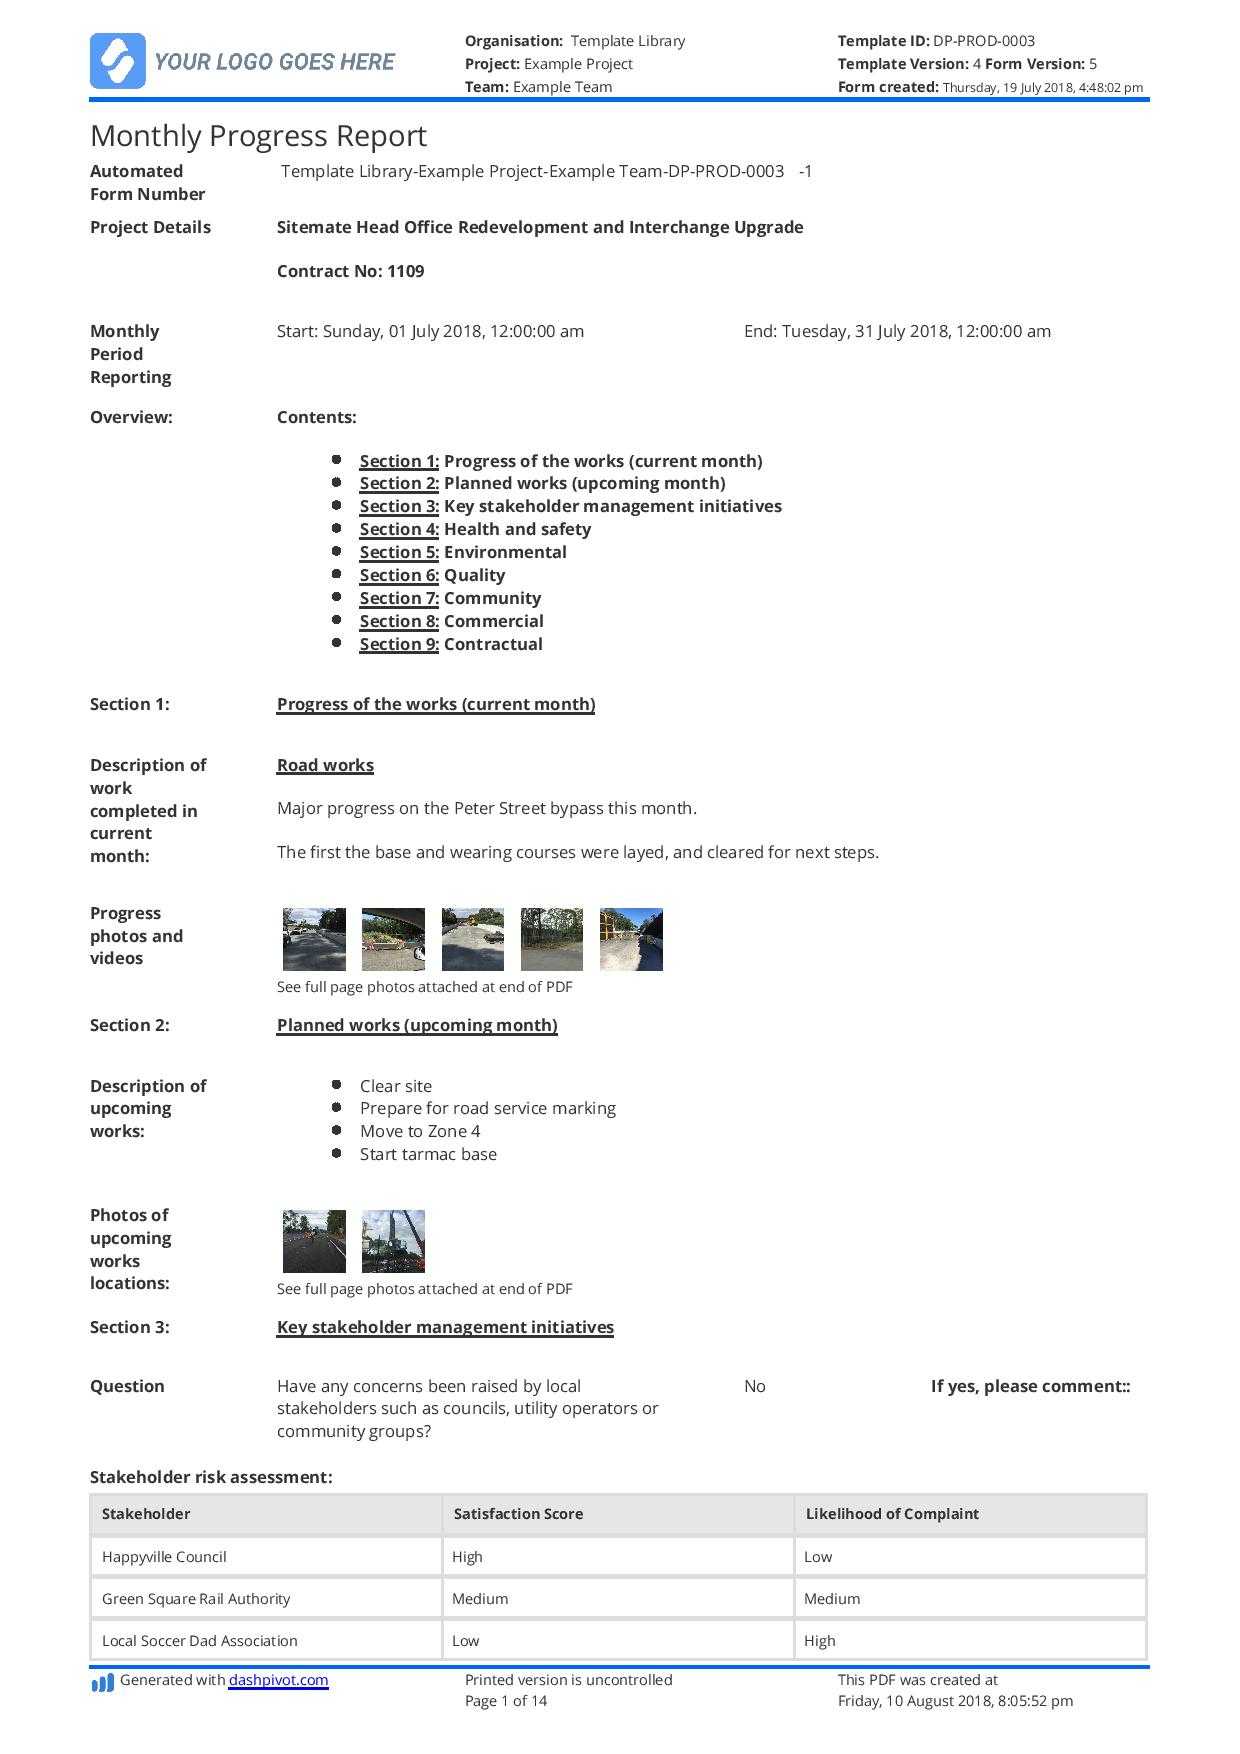 Monthly Construction Progress Report Template: Use This With Monthly Health And Safety Report Template